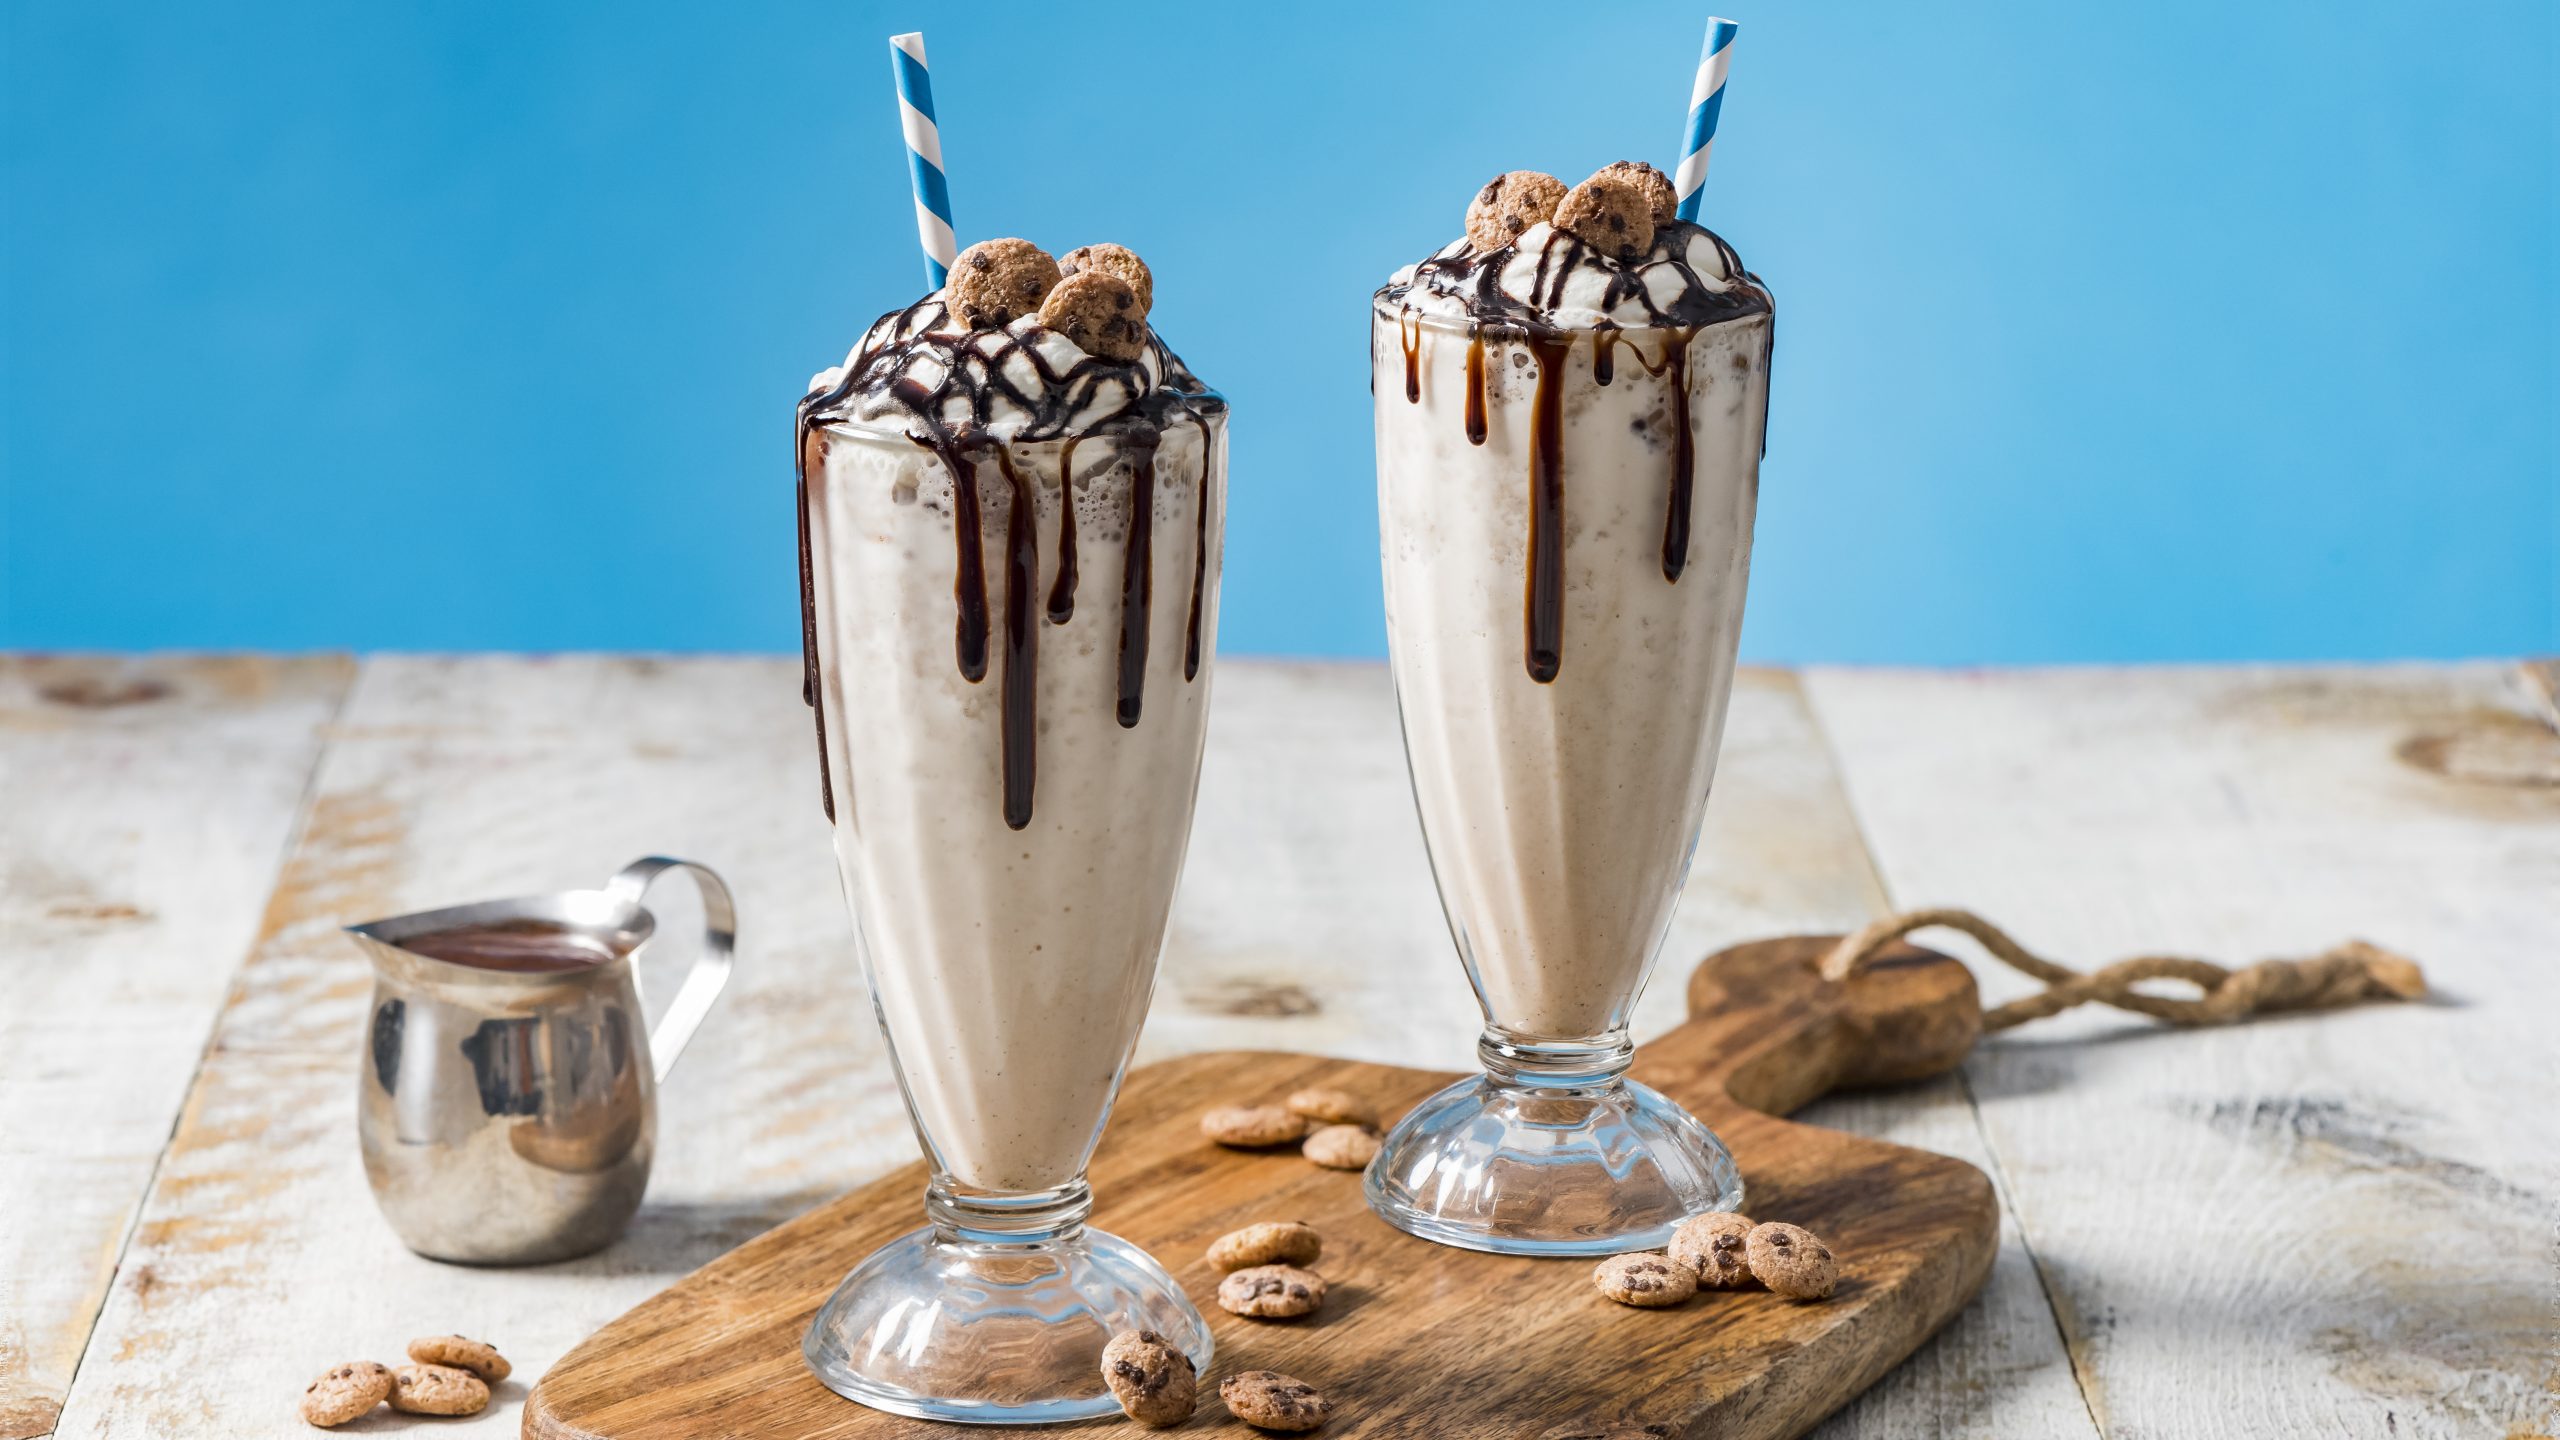 Two Chips Ahoy Cereal Milkshakes in tall cups with chocolate garnish and blue and white straws.